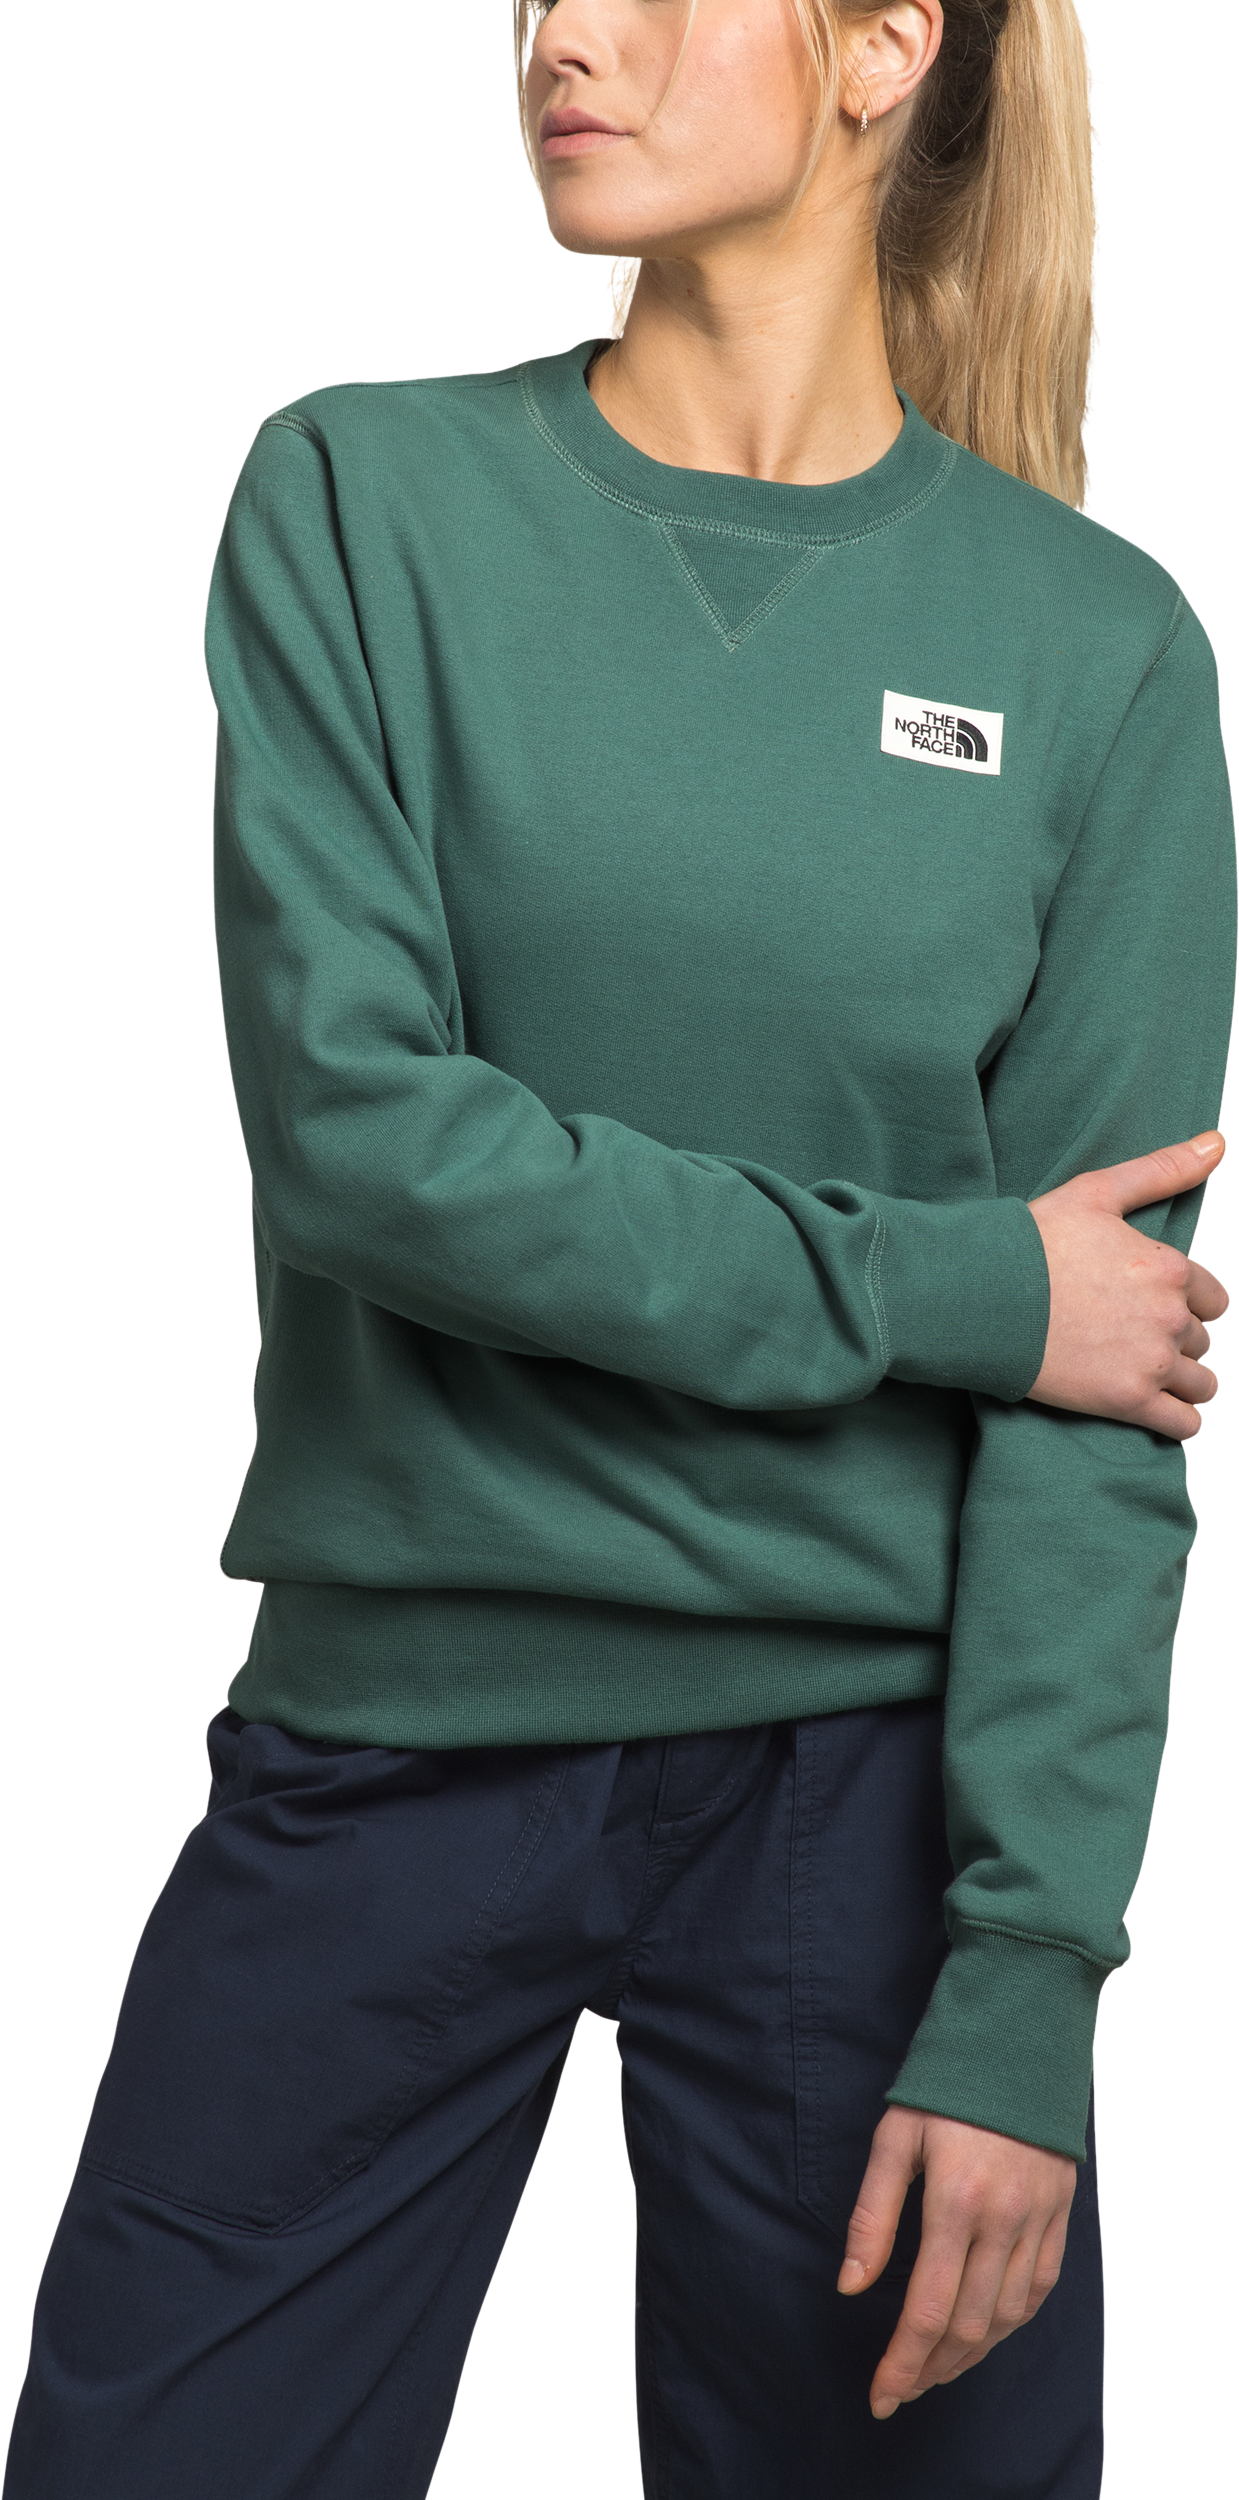 The North Face Heritage Patch Crew-Neck Long-Sleeve Sweatshirt for Ladies - Dark Sage - S